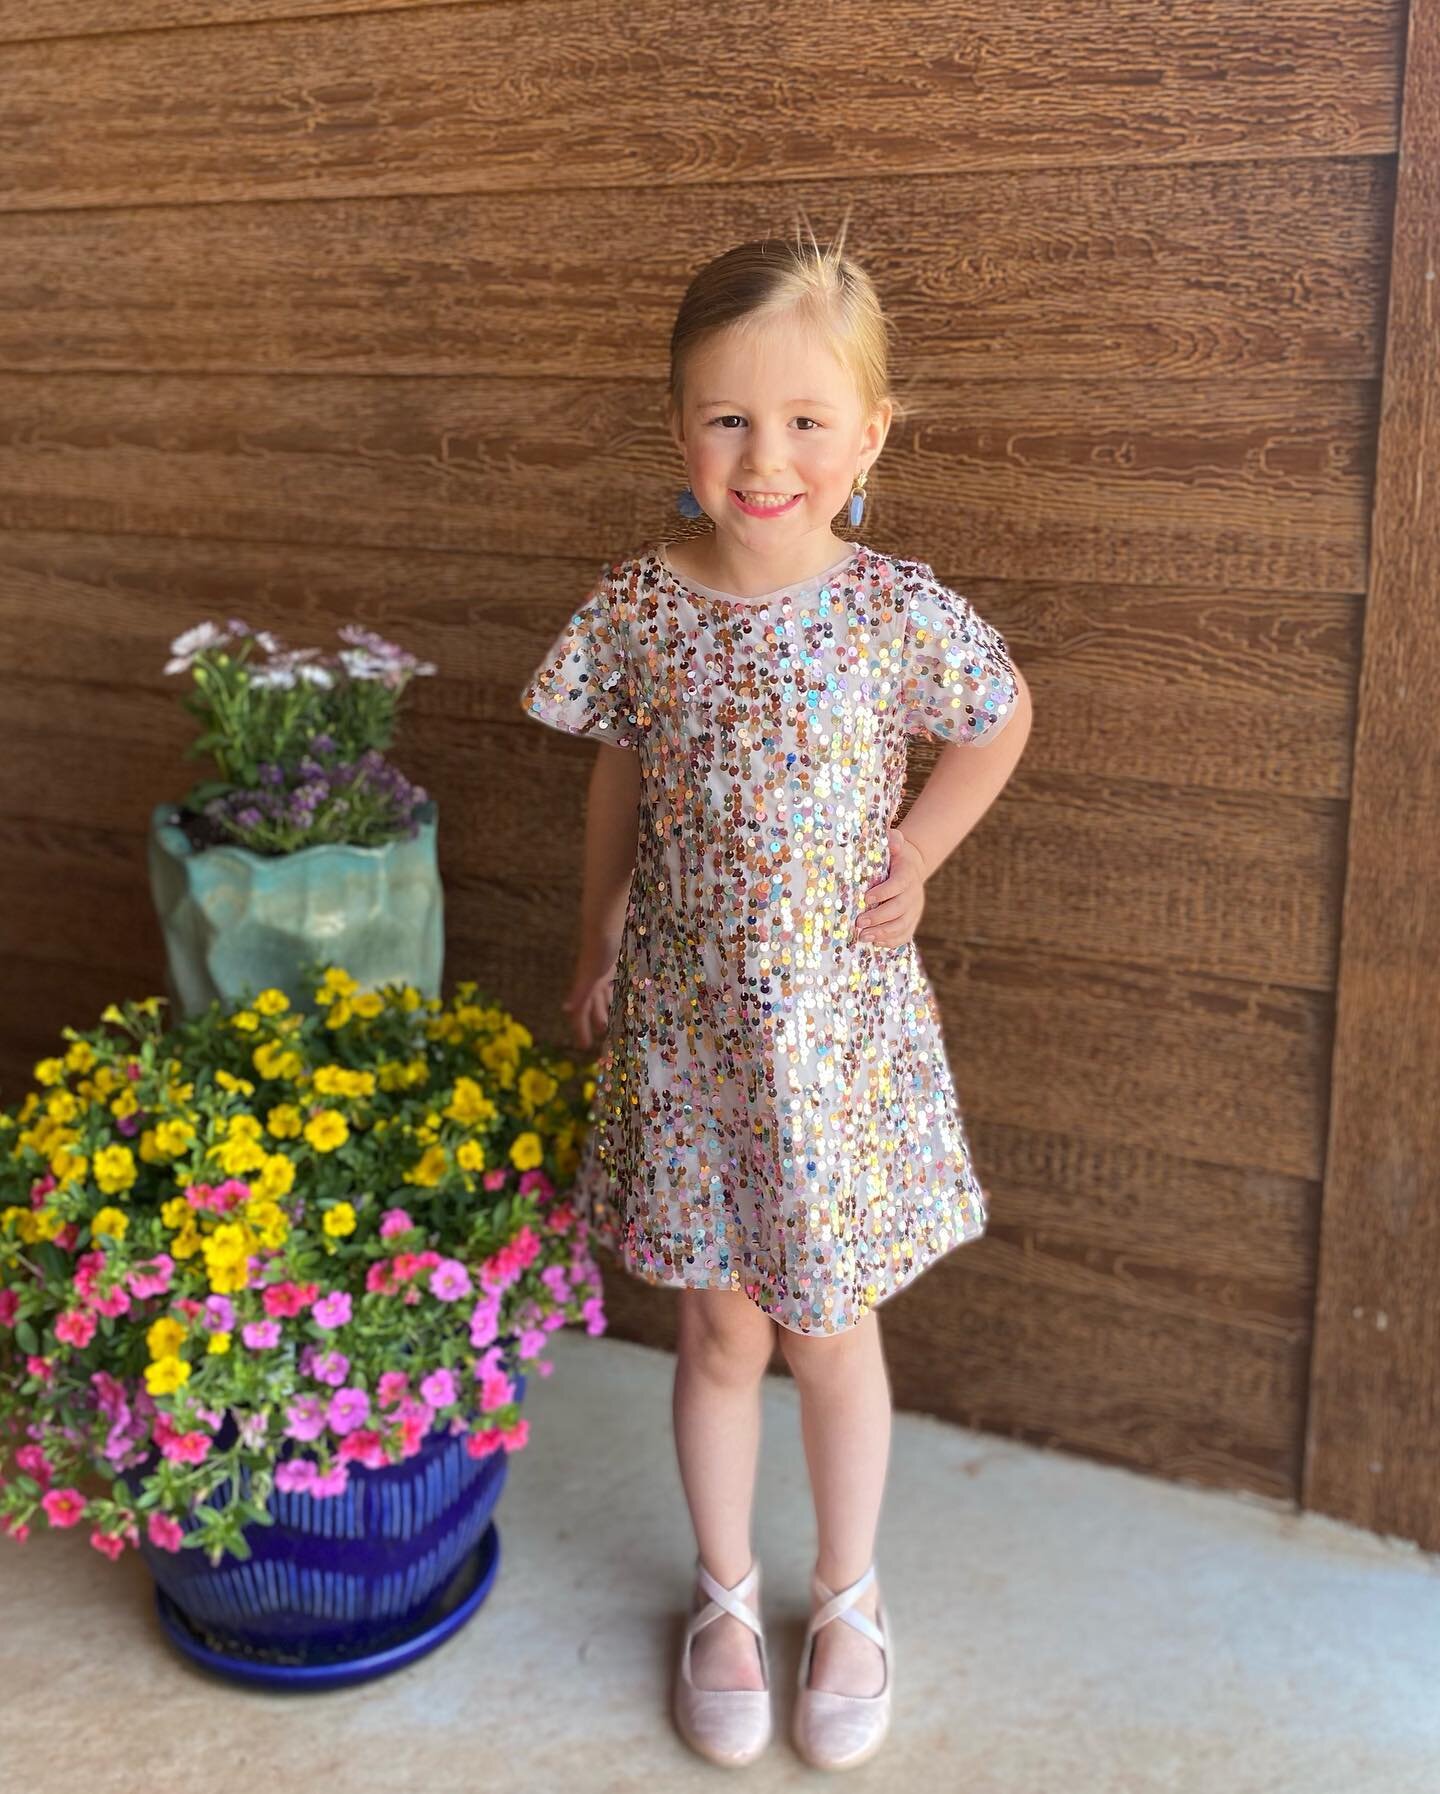 Just sent my girl off with my big guy to the Daddy Daughter Dance. Can you tell she was excited? 

Dresses, glitter, flowers and lipstick are her JAM! 

My little guy and I are planning a mommy / bro movie night with Clifford and maybe some popcorn i